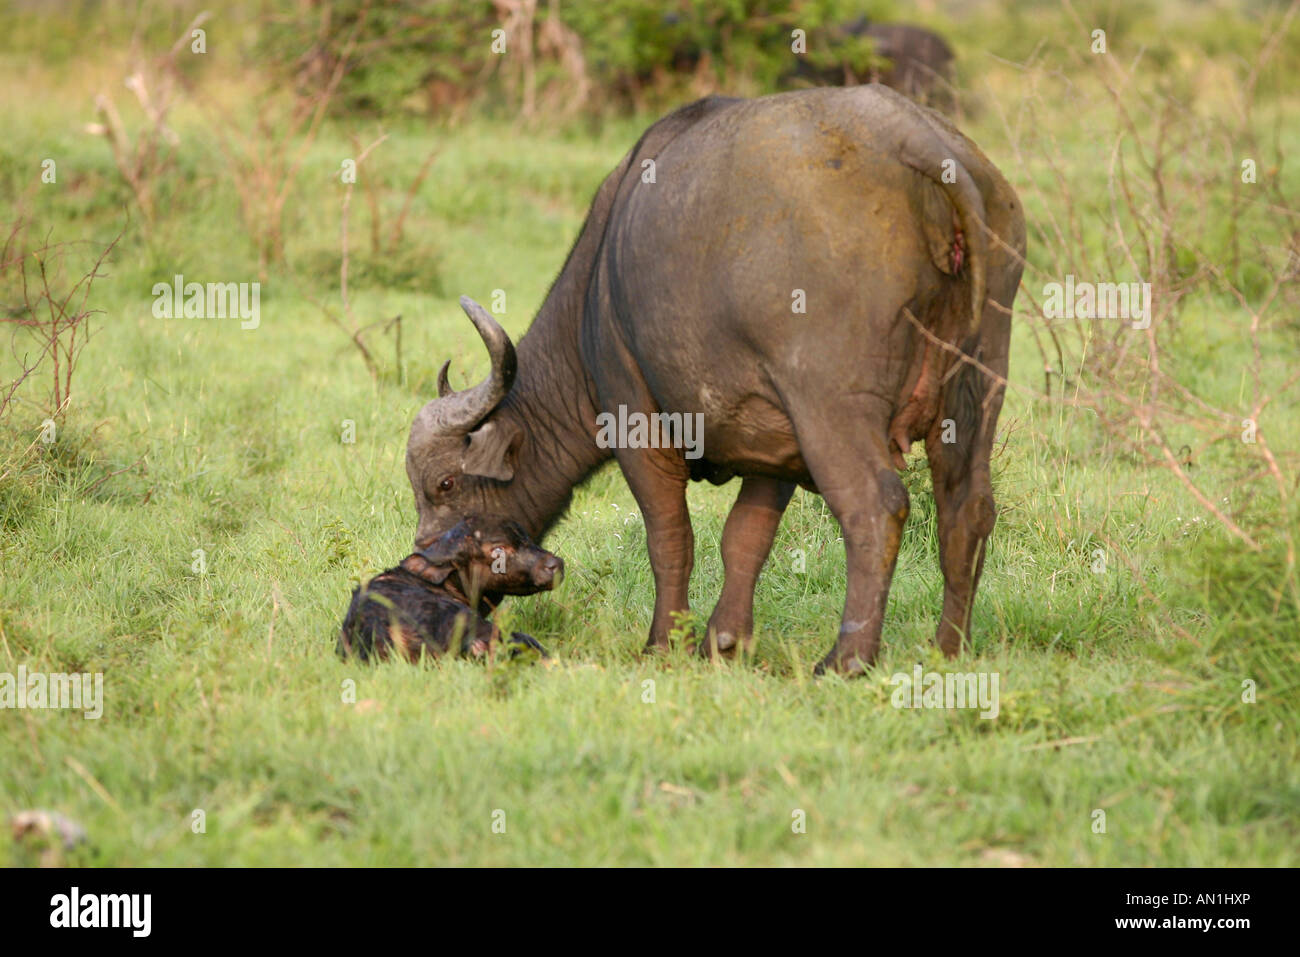 A buffalo cow standing over a newborn calf lying down in the grass Stock Photo